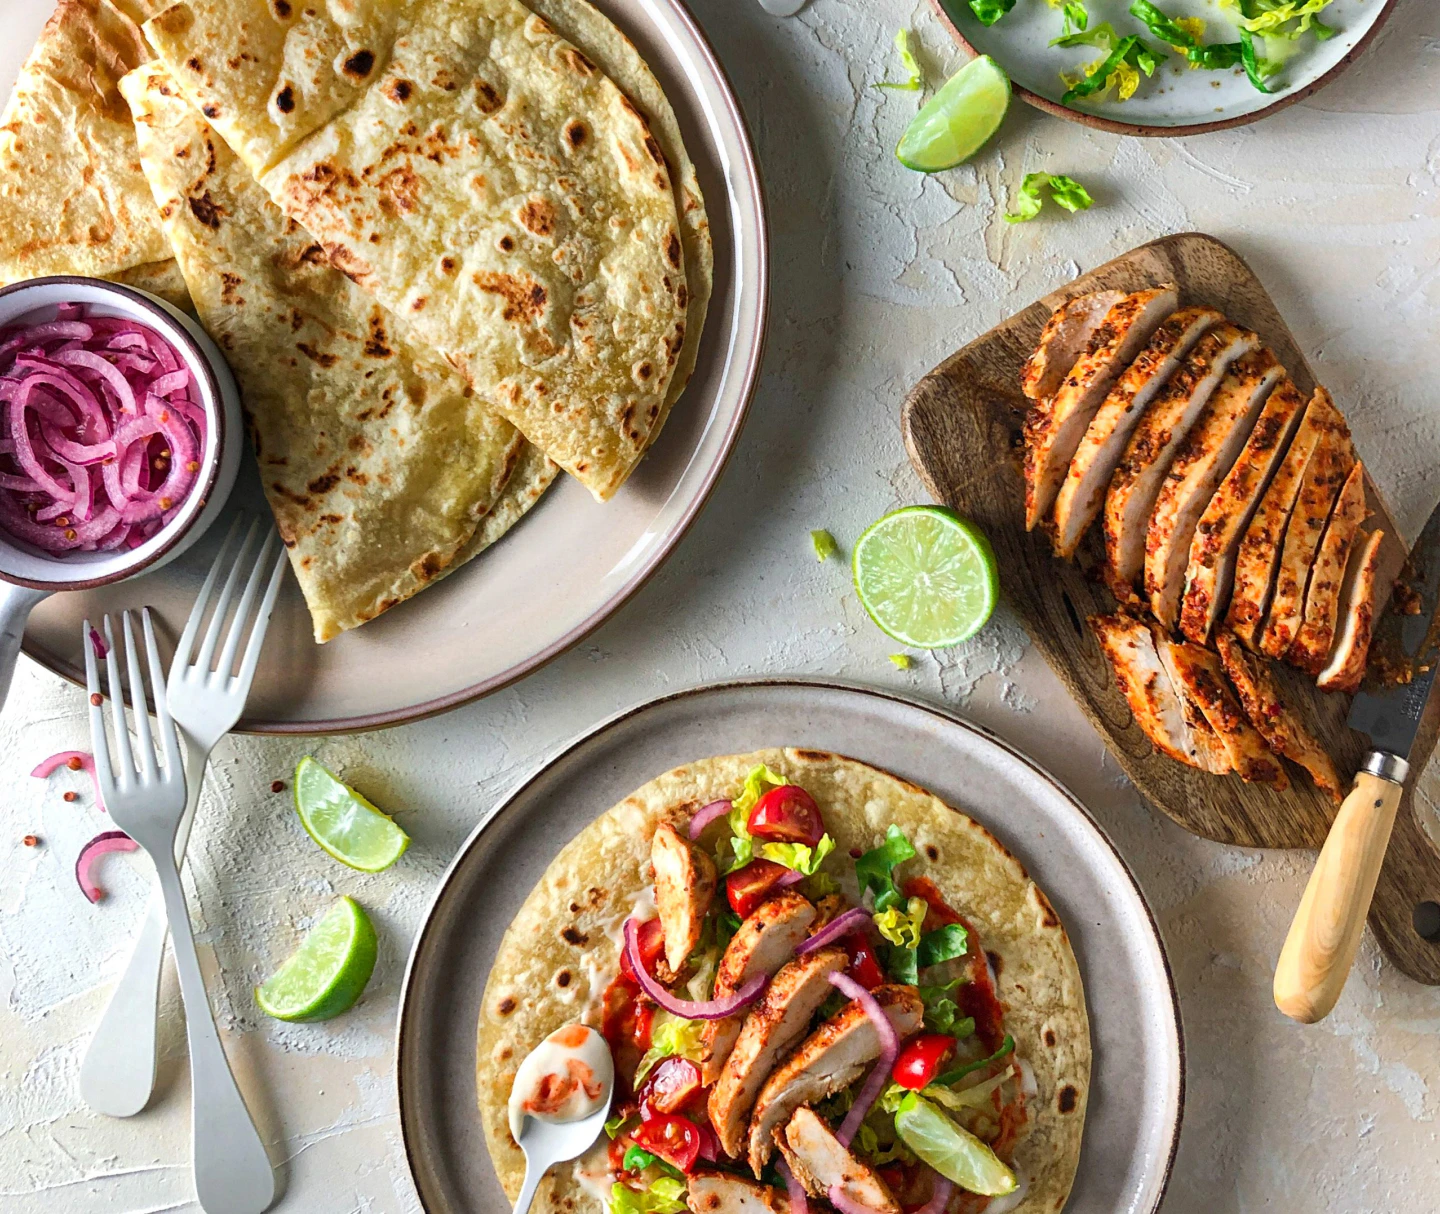 Three plates are in view, one has folded Piadina on it with a pot of pickled red onions, on a different plate is an assembled lime and chilli chicken piadina, the third plate has sliced chicken breast on it.